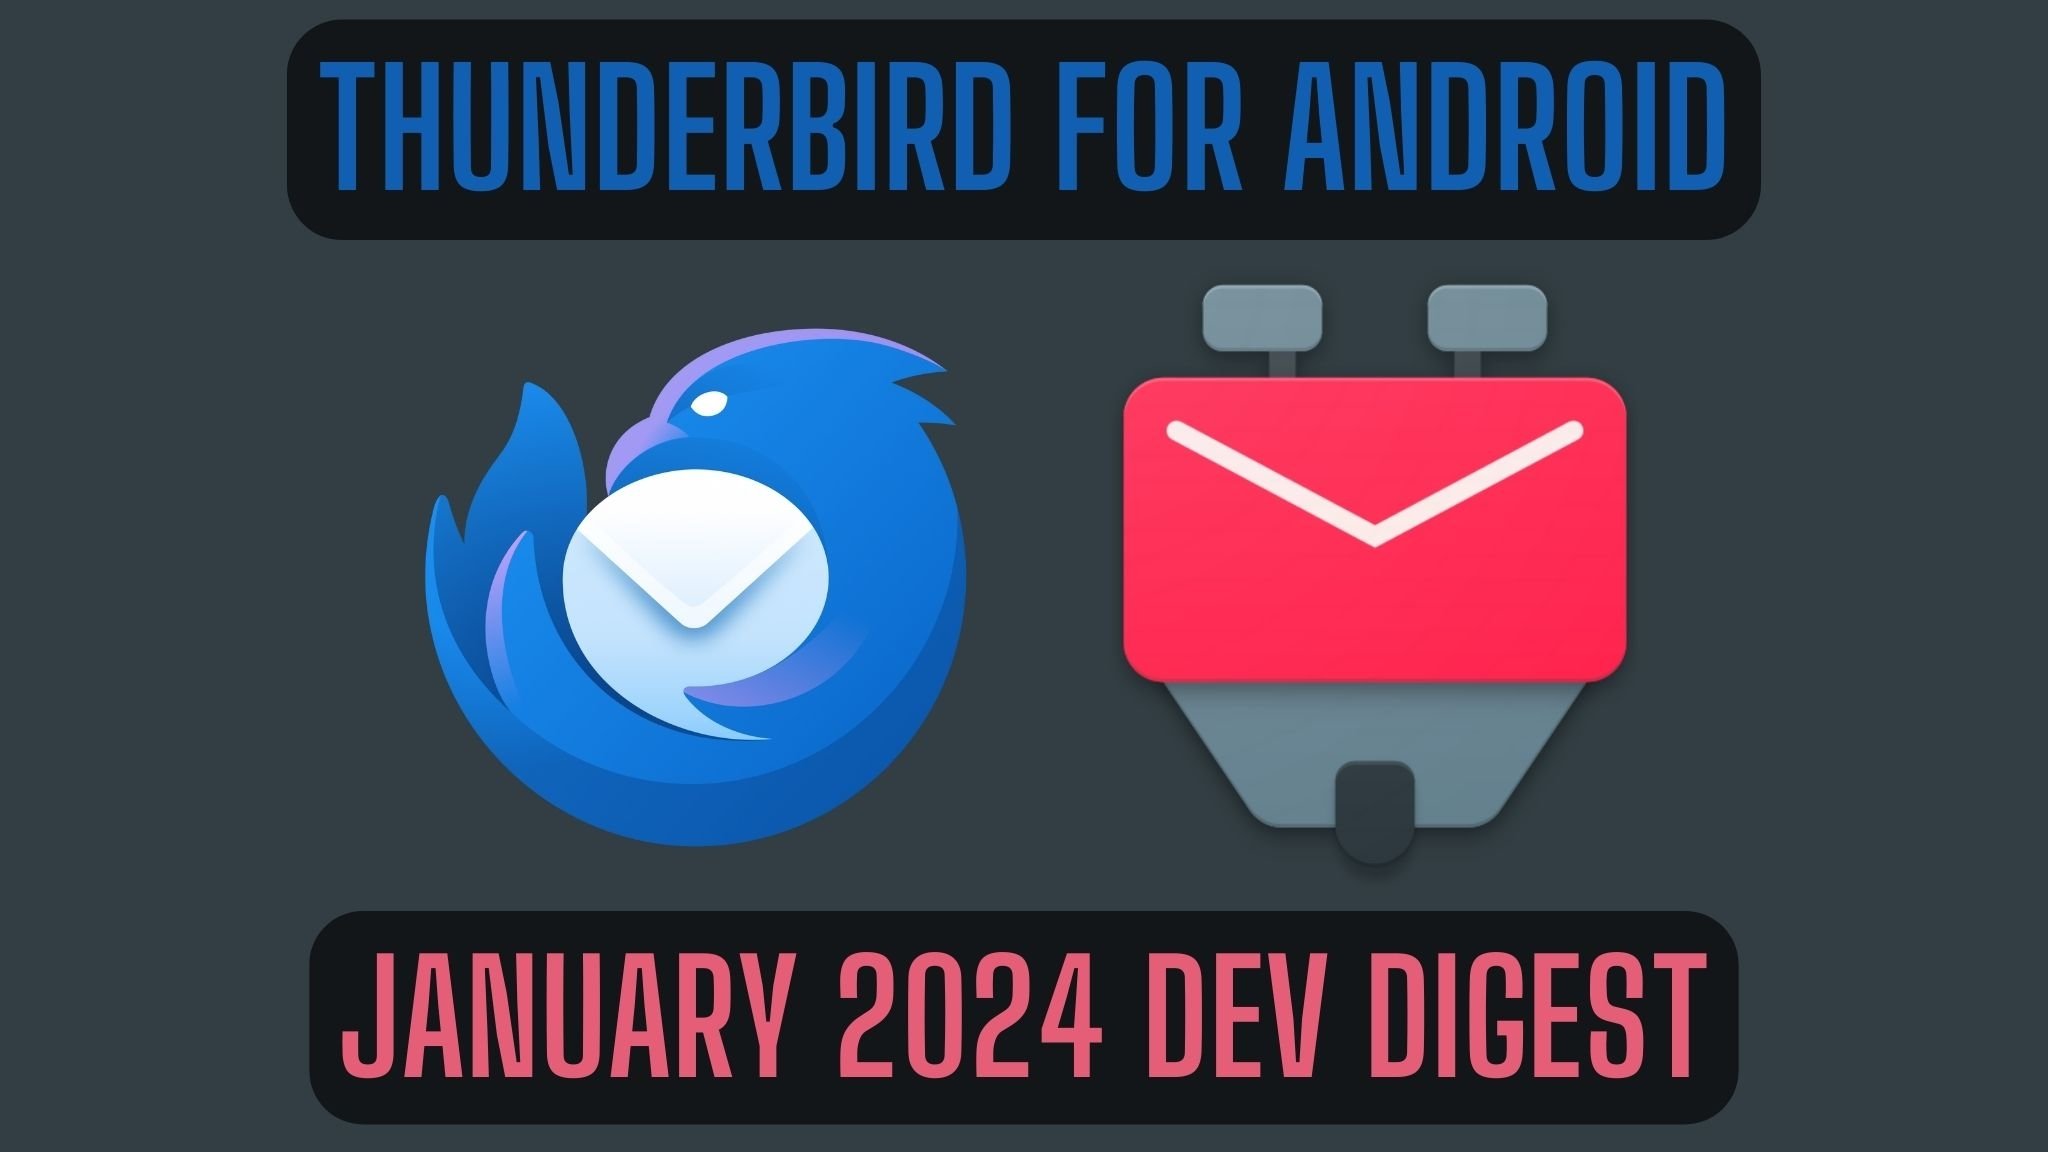 Thunderbird for Android